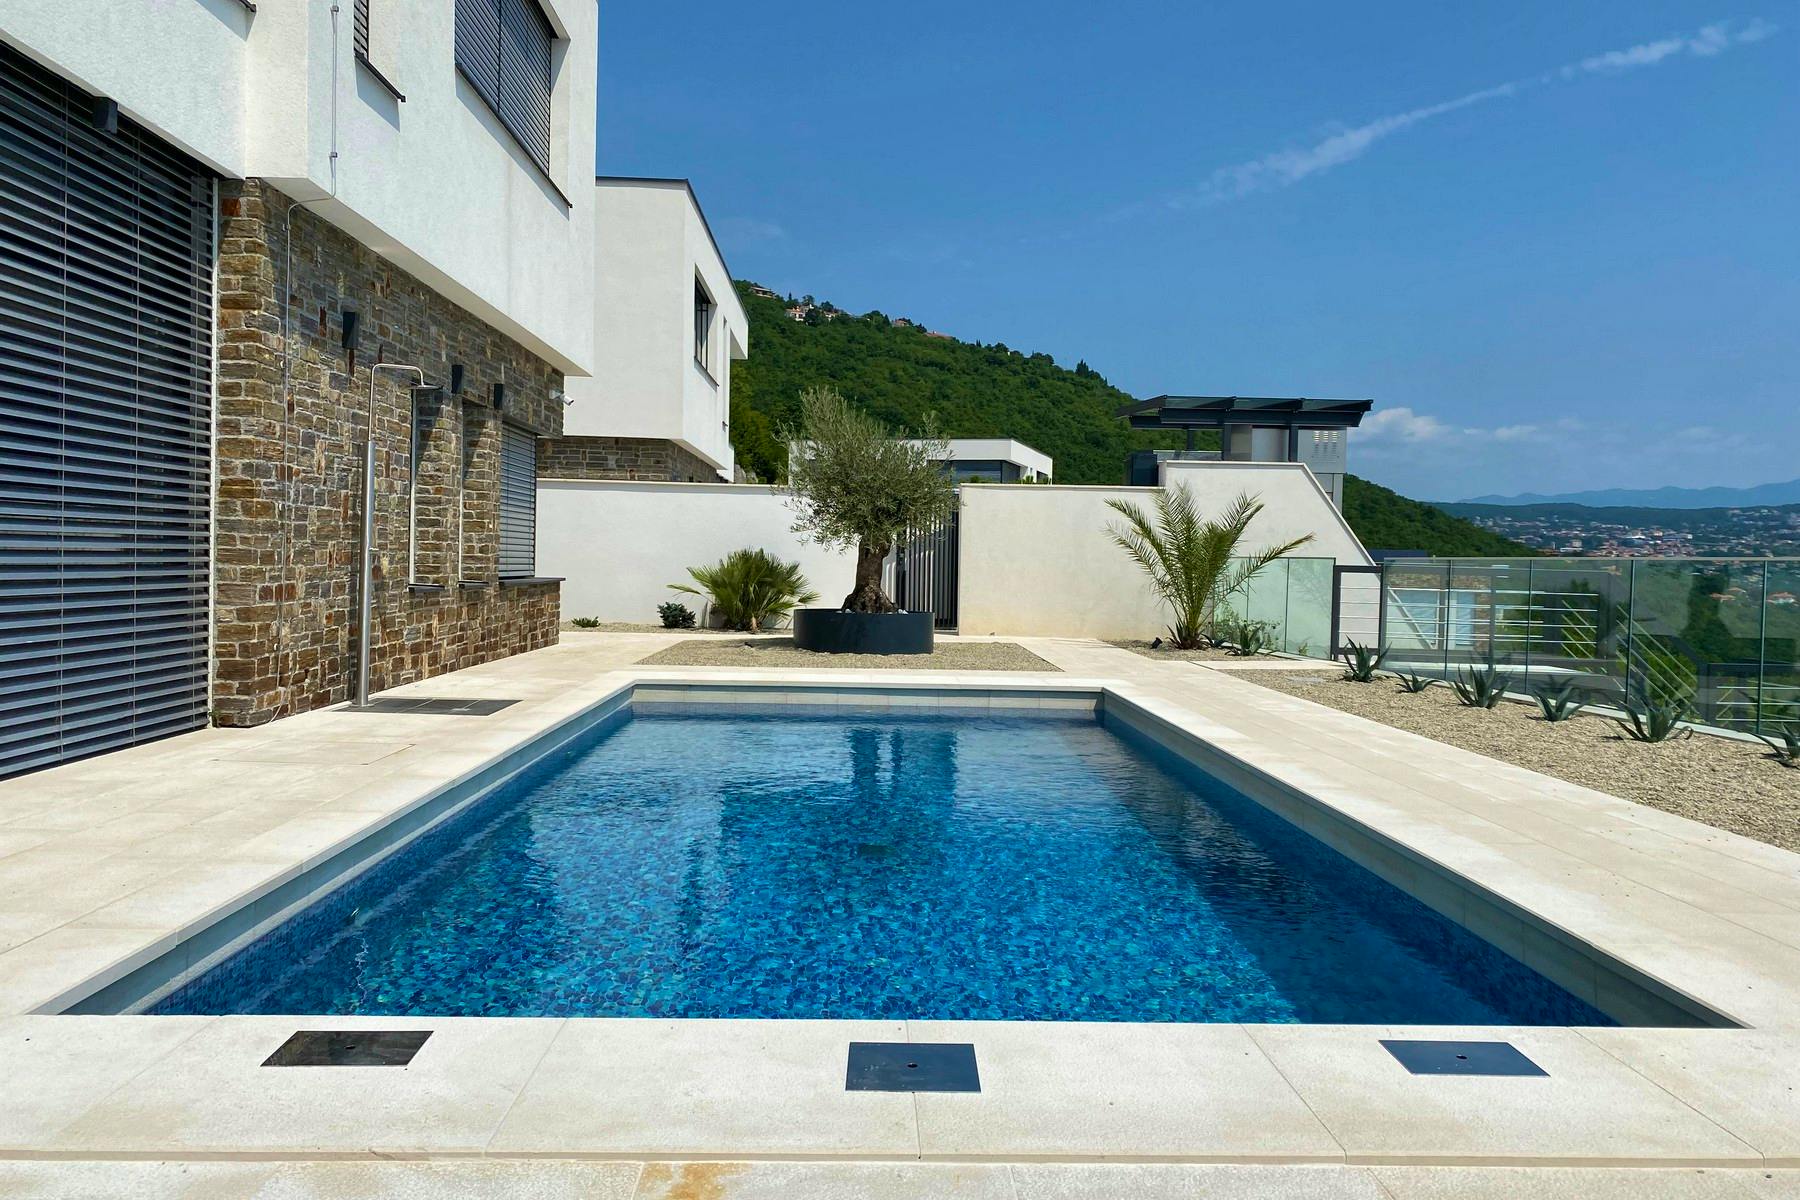 Newly built modern villa with swimming pool and view of Opatija